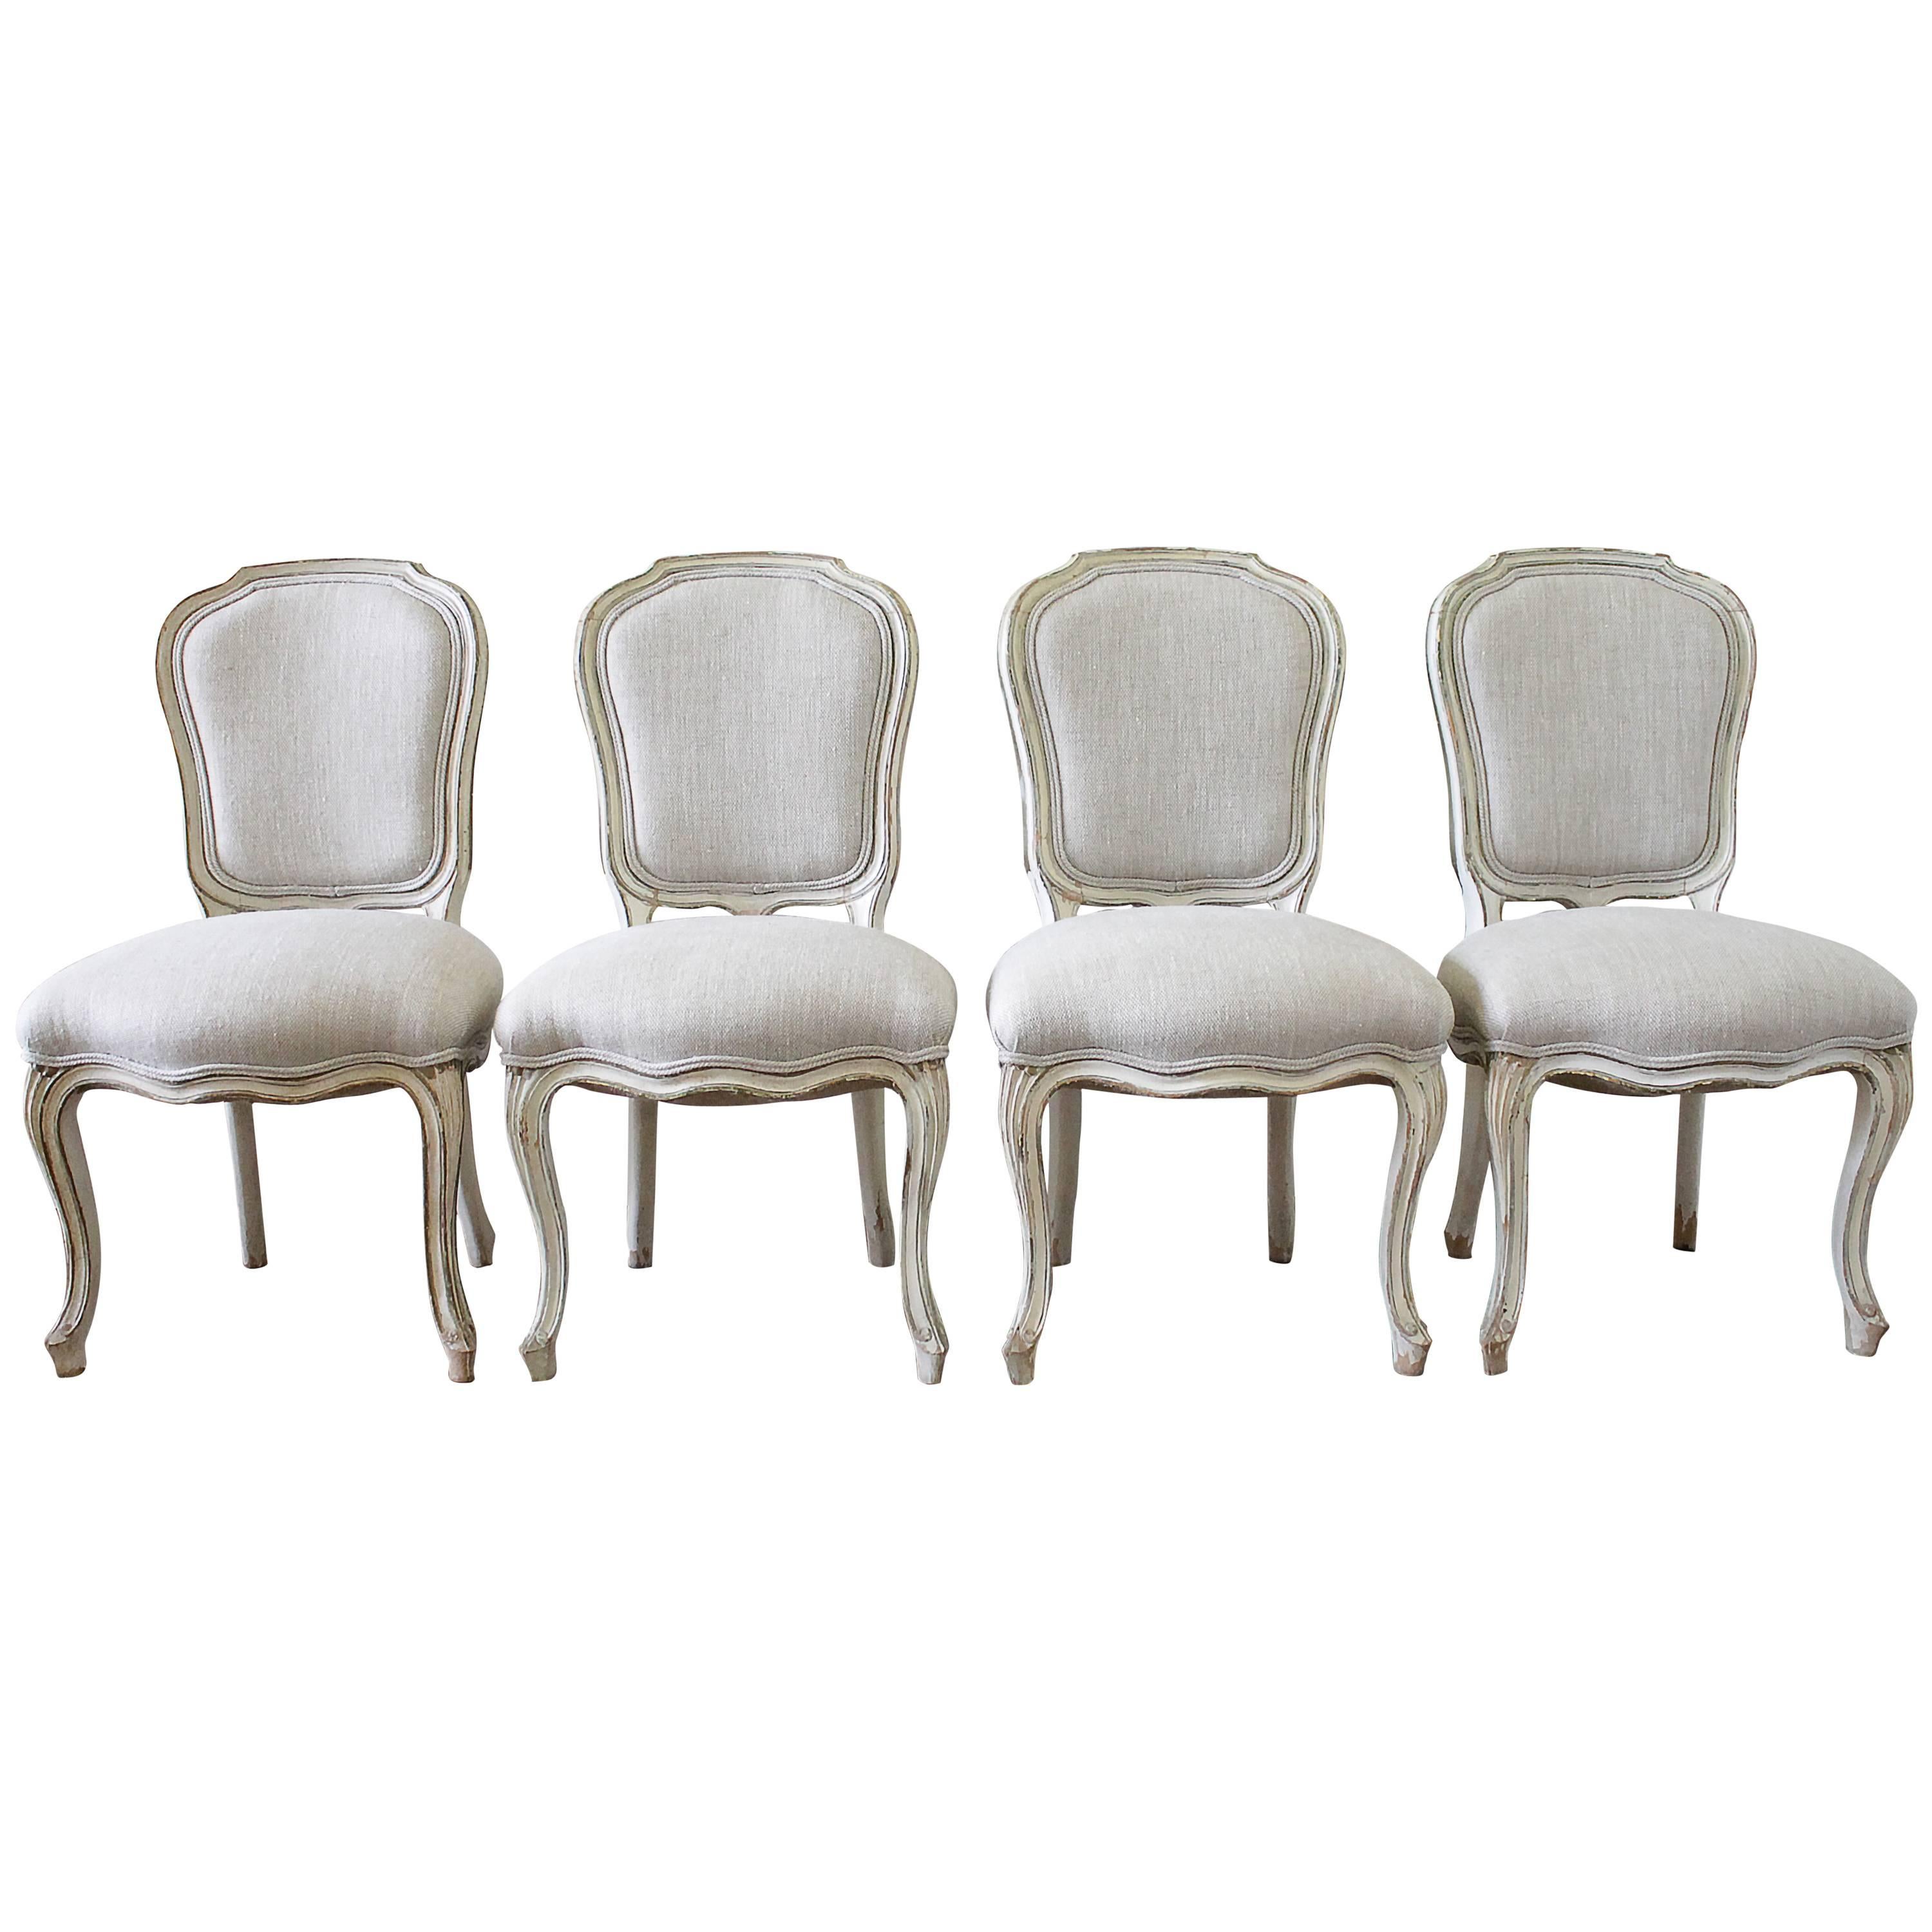 Set of Four Painted Louis XV Style Dining Chairs in Irish Linen